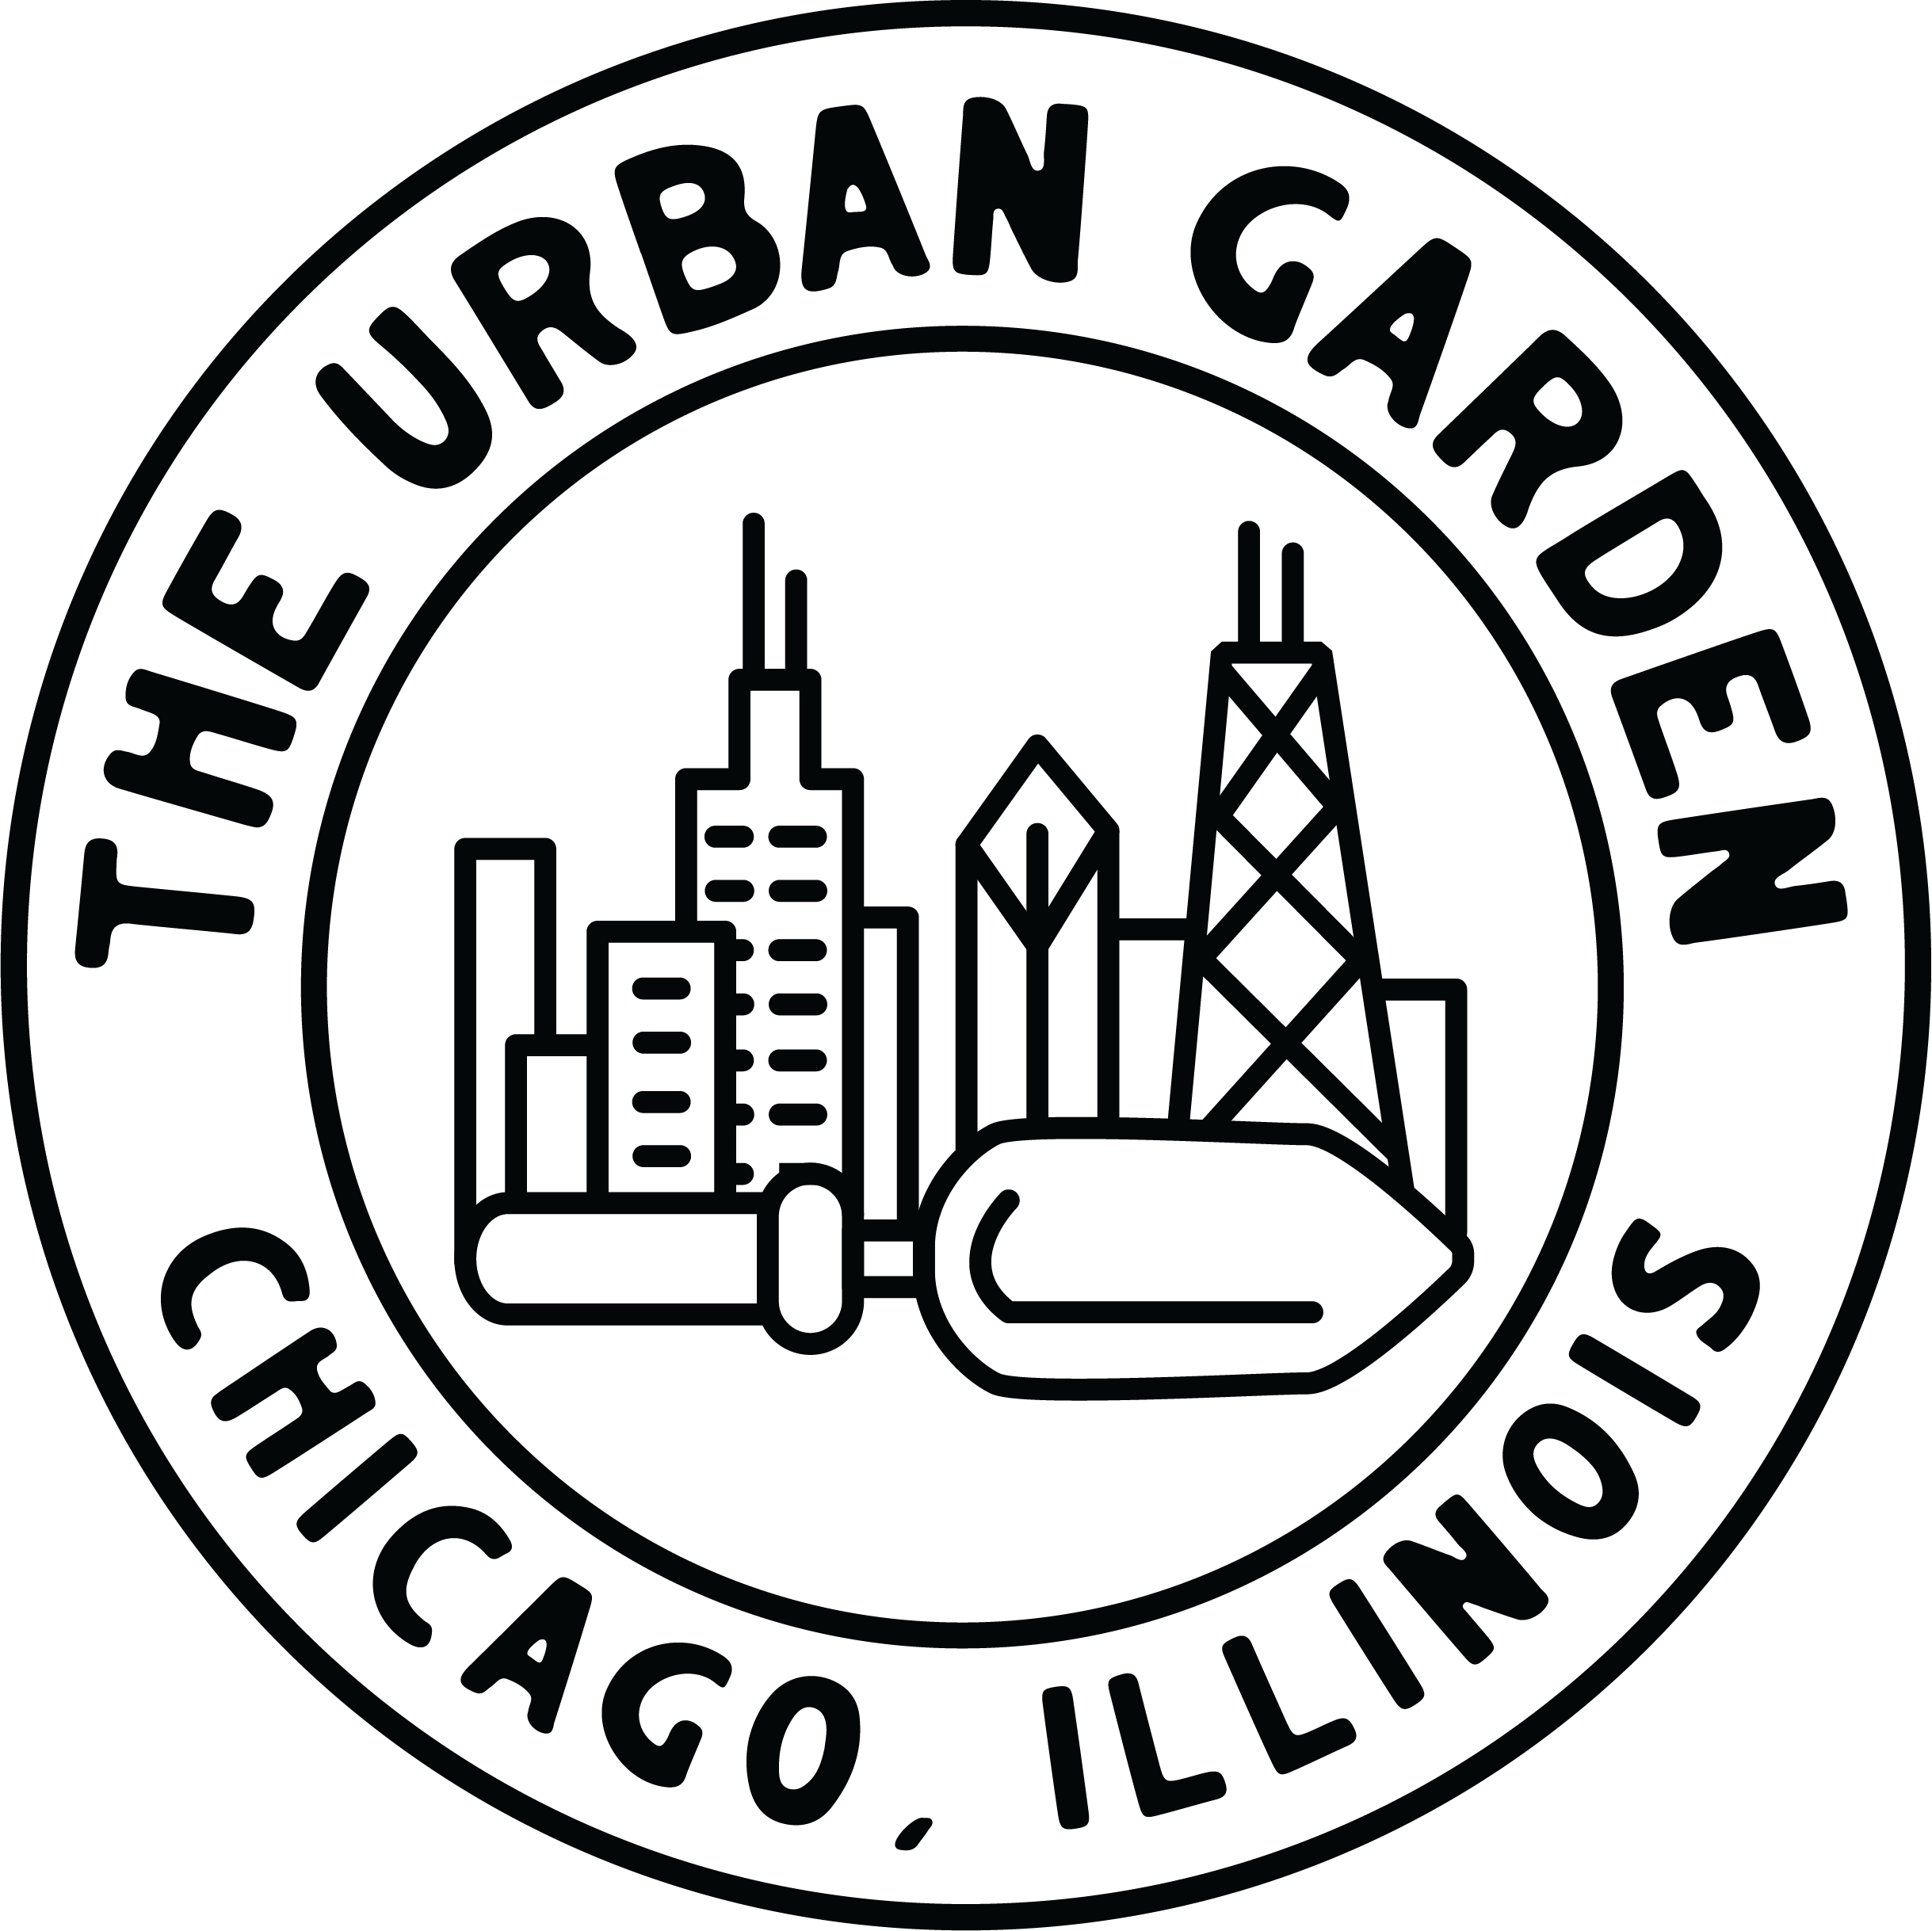 The Urban Garden Seal 2 logo design by logo designer Made By Lisa Marie for your inspiration and for the worlds largest logo competition